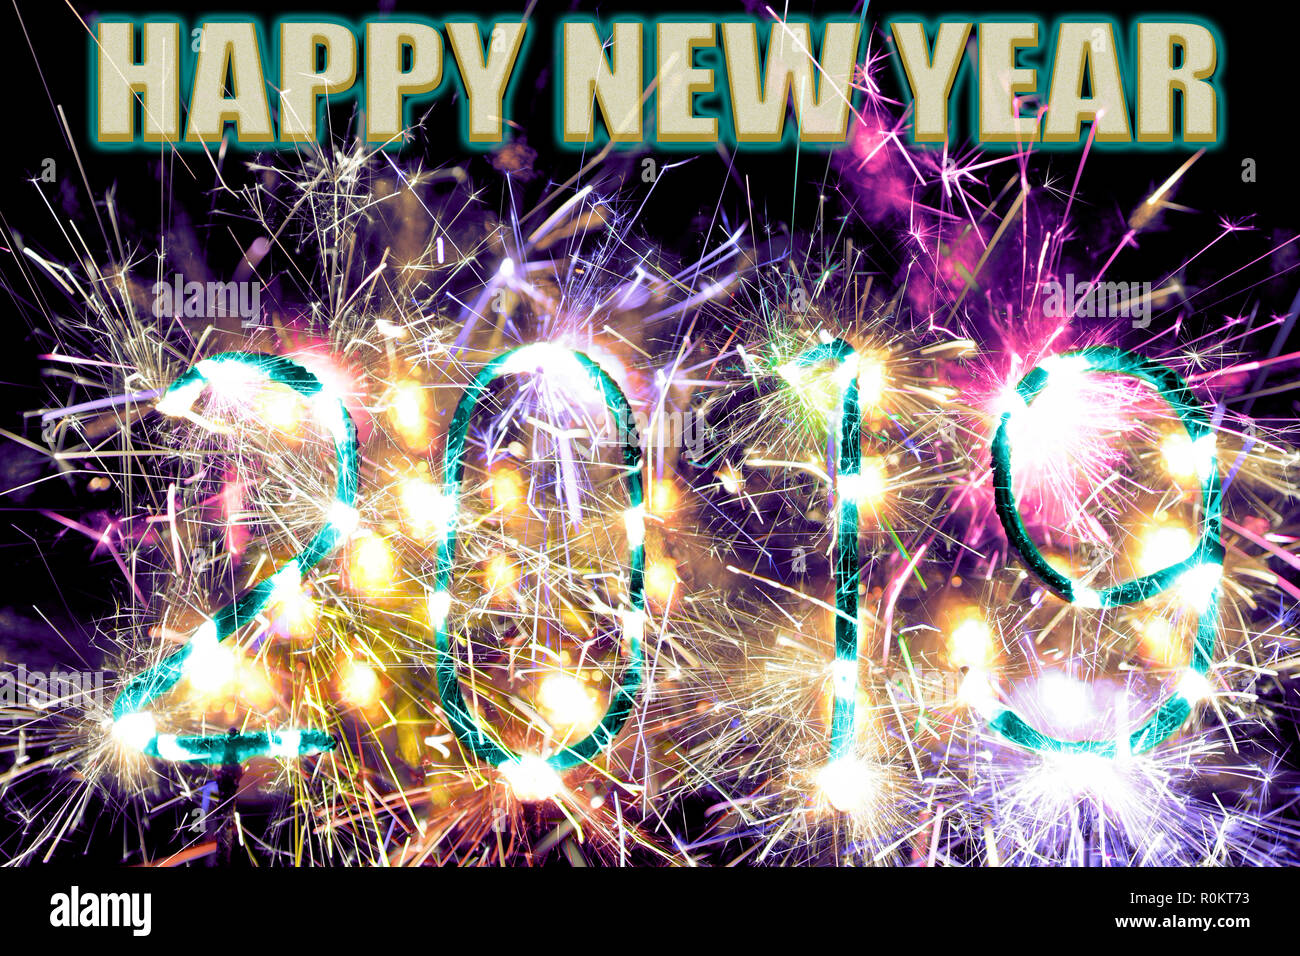 Happy New Year 2019. Sparkler fireworks number 2019 burning with text 'Happy New Year'. Vibrant, colorful and full of energy. Stock Photo